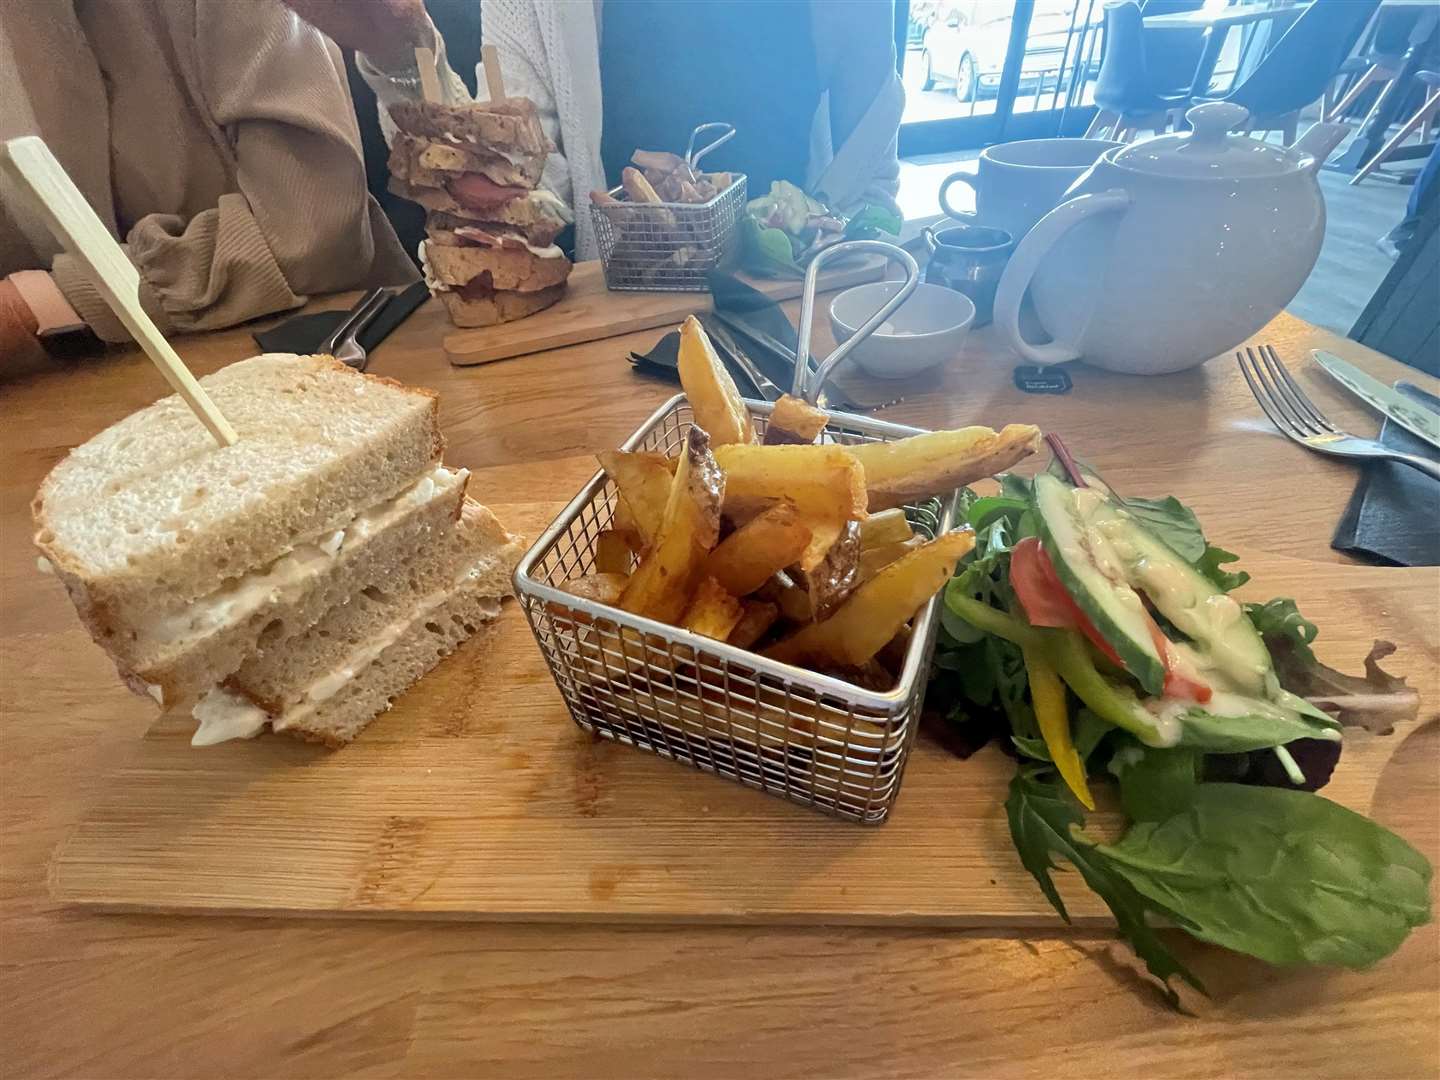 My egg mayo sandwich with chips and salad – which was topped with a lovely dressing